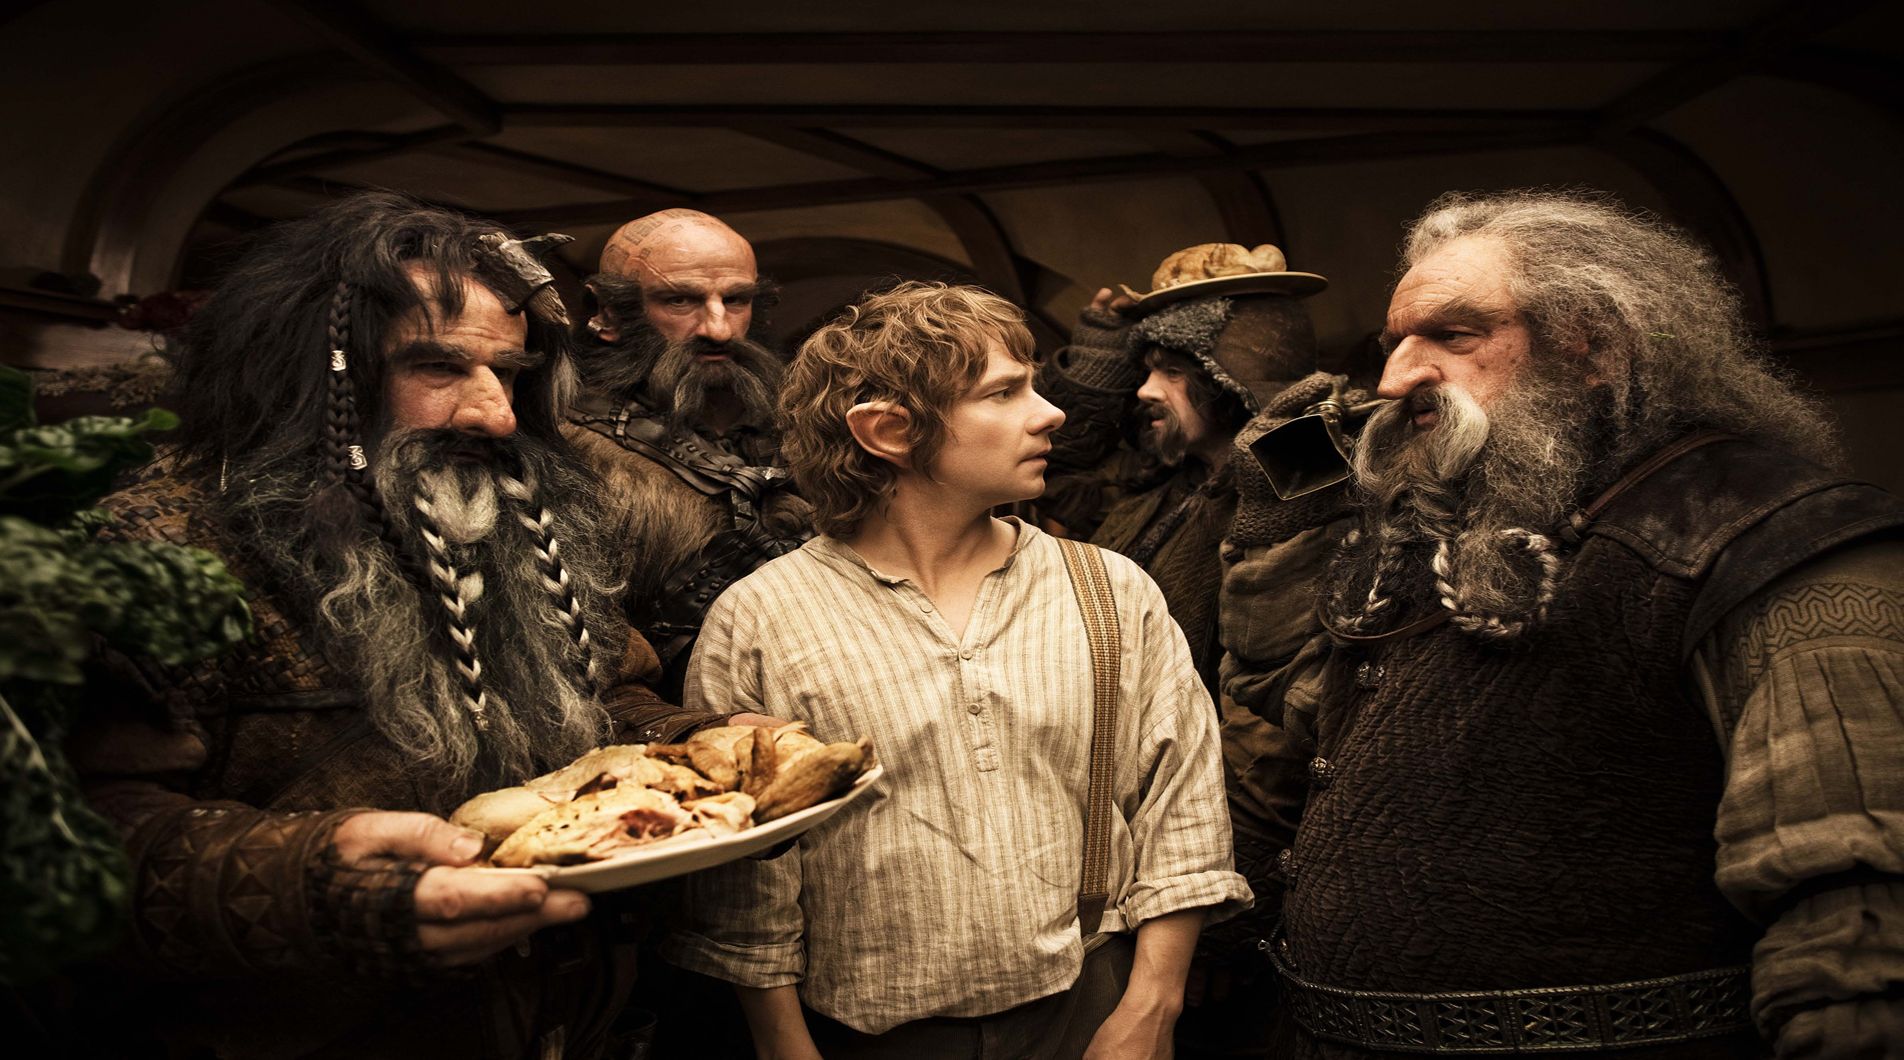 The Hobbit: There And Back Again